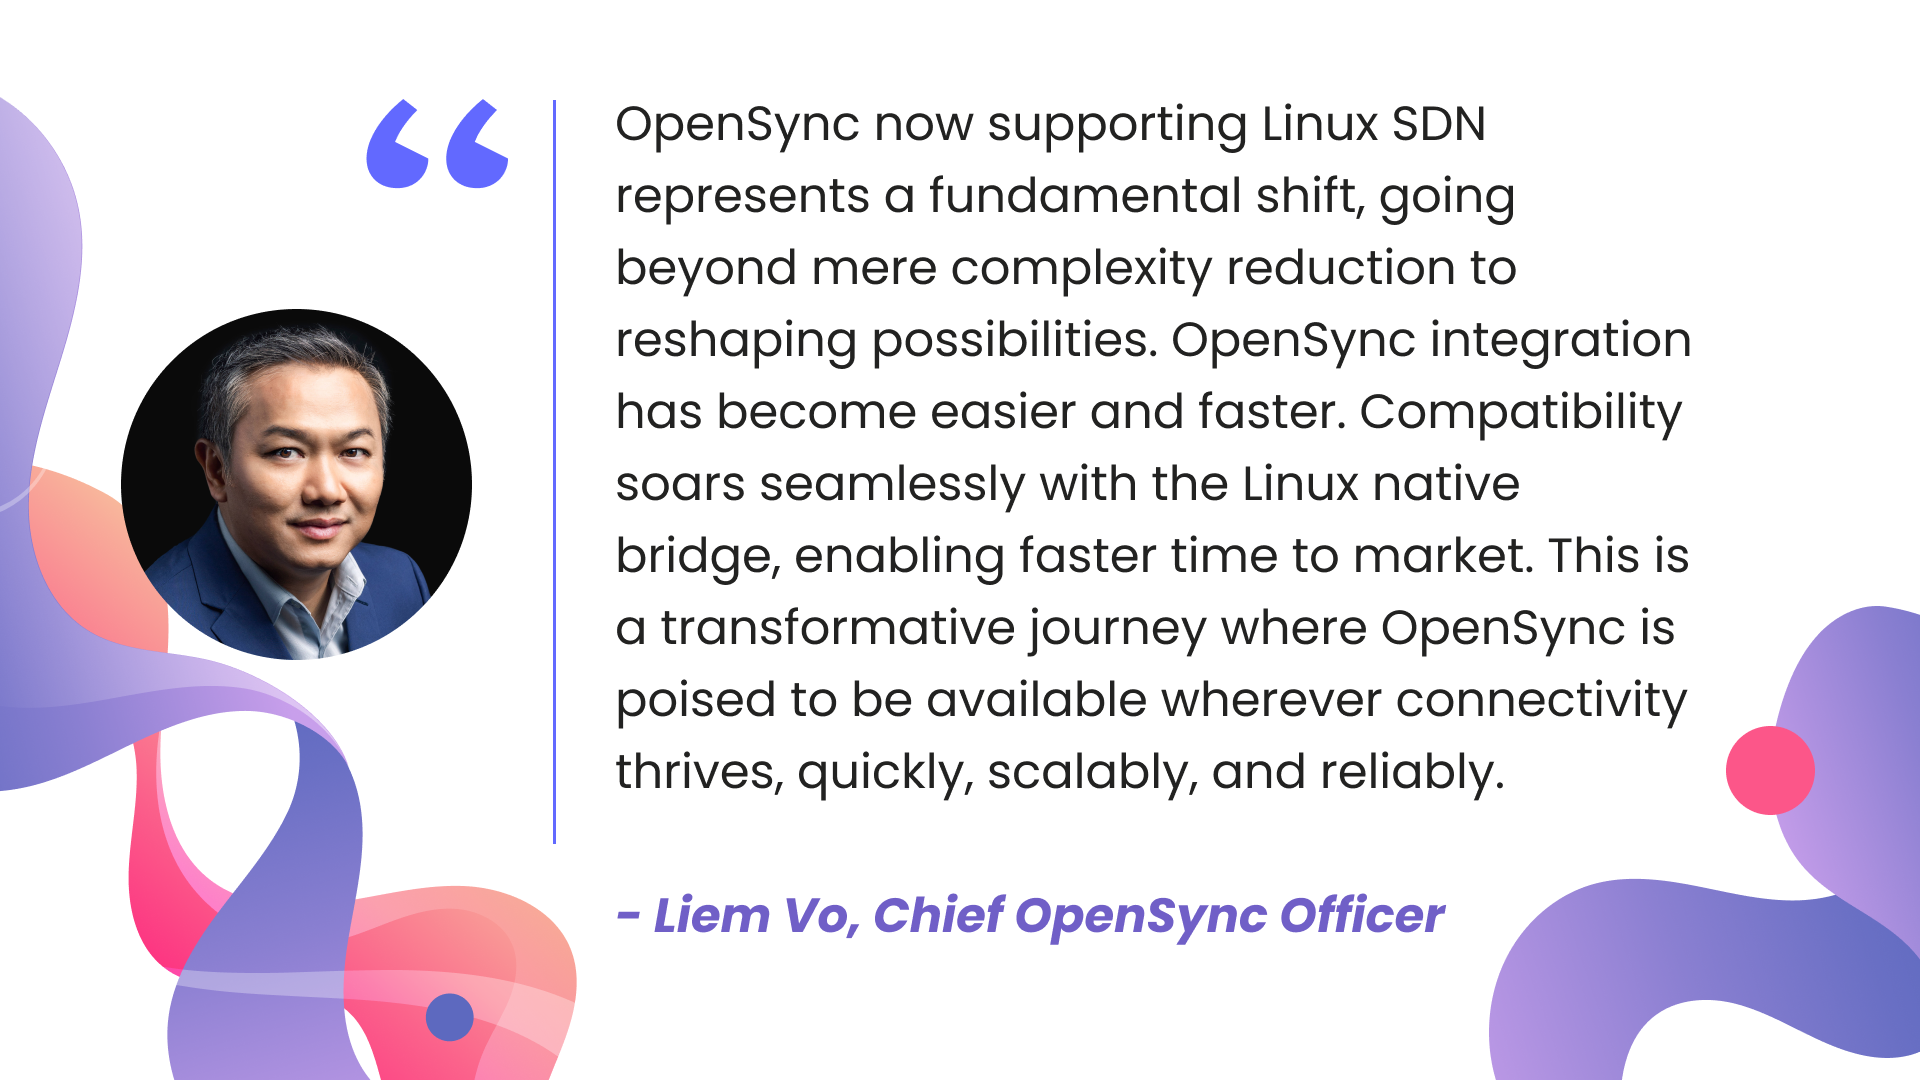 Liem Vo, Chief OpenSync Officer Quote